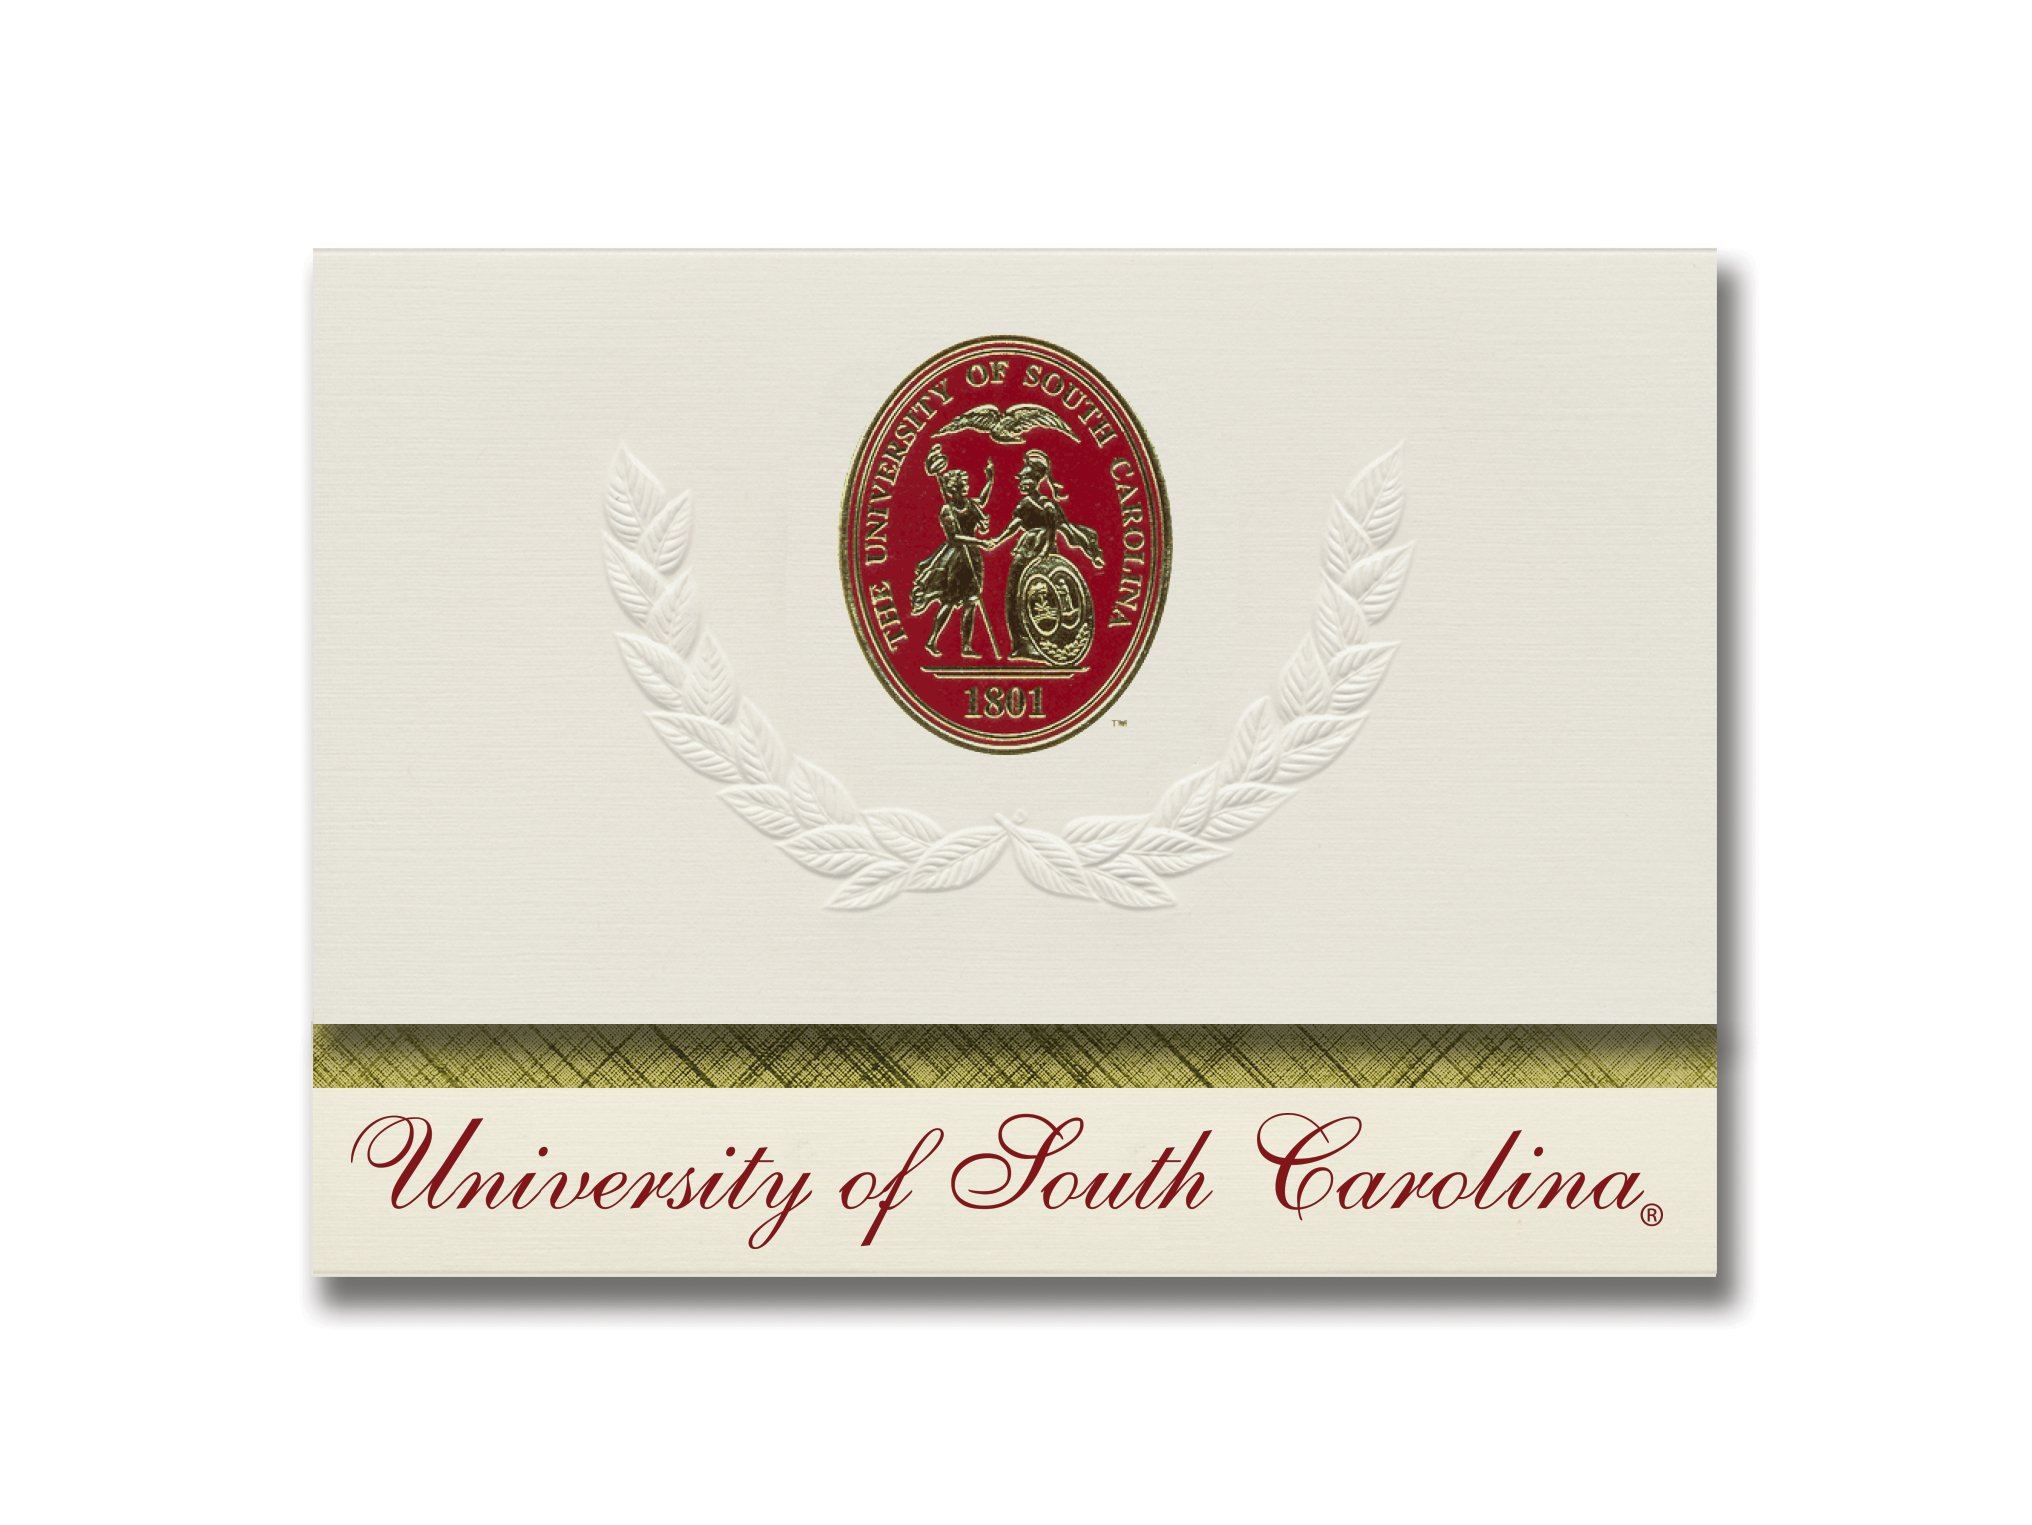 Signature Announcements University of South Carolina Graduation Announcements, Platinum style, Basic Pack 20 with U. of South Carolina Seal Foil